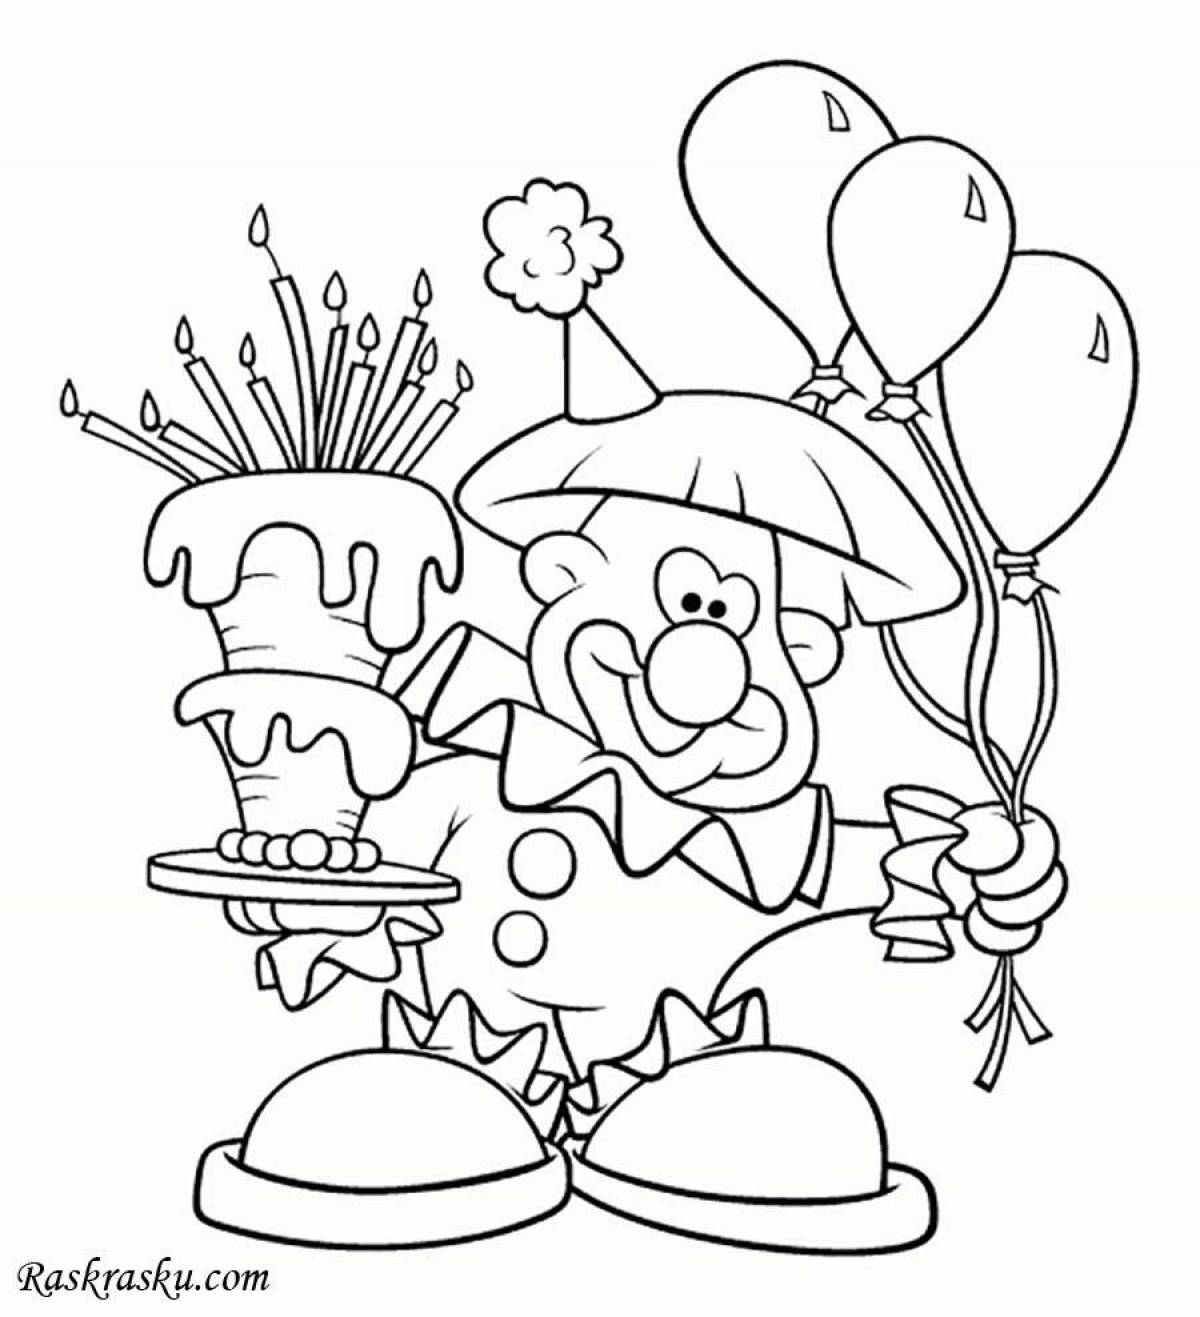 Playful birthday coloring page